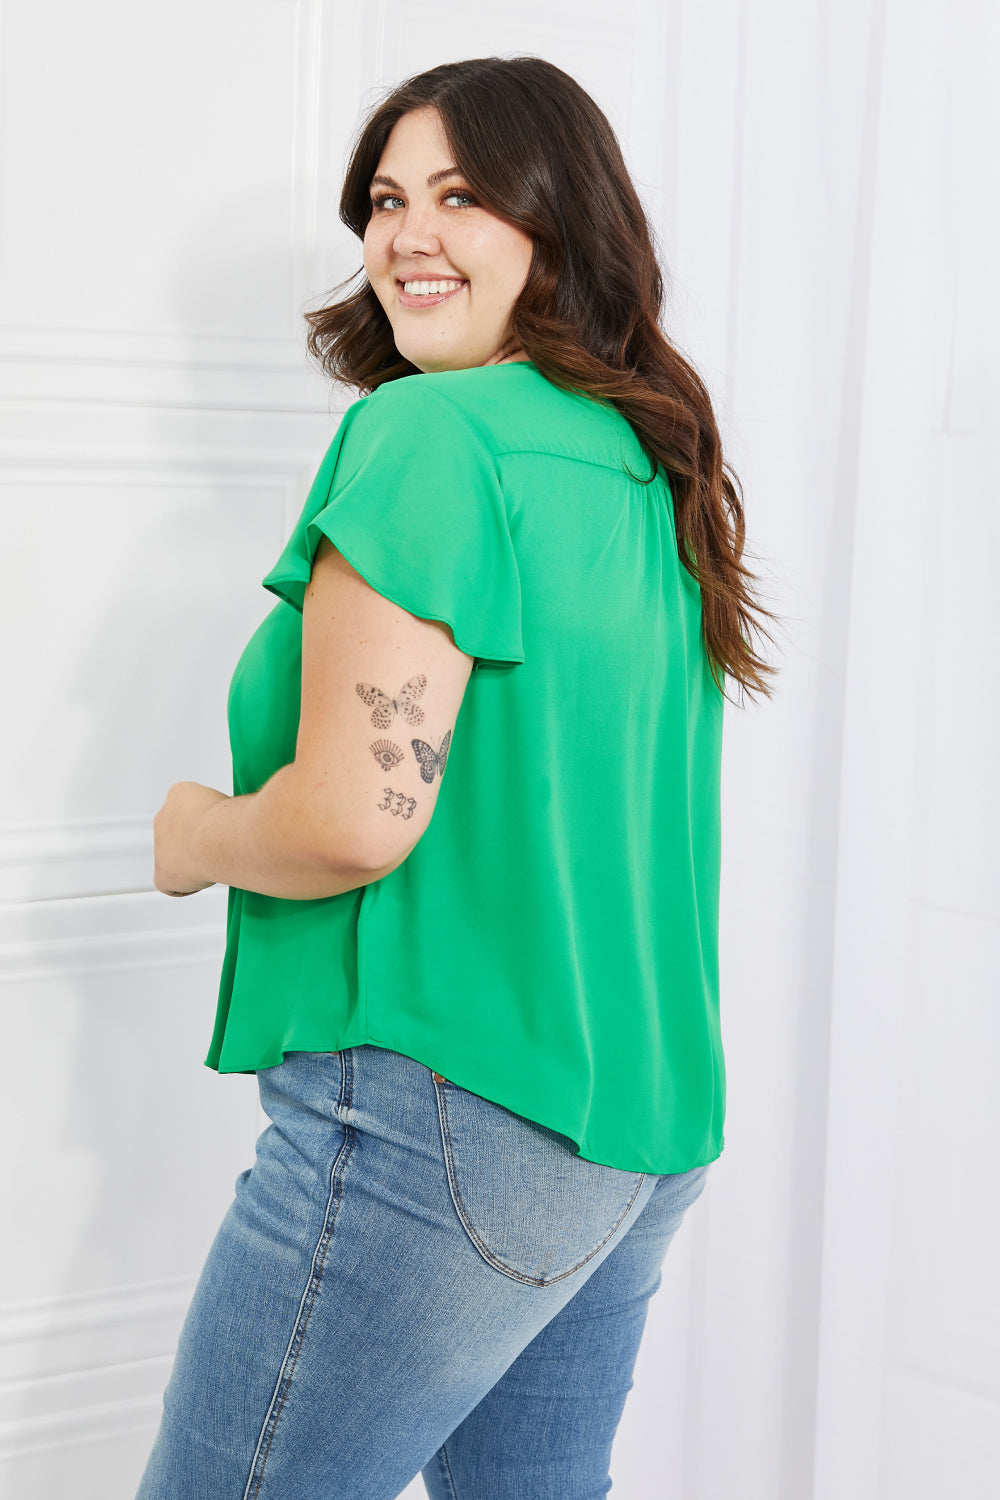 Sew In Love Just For You Short Ruffled sleeve length Top in Green - Online Only